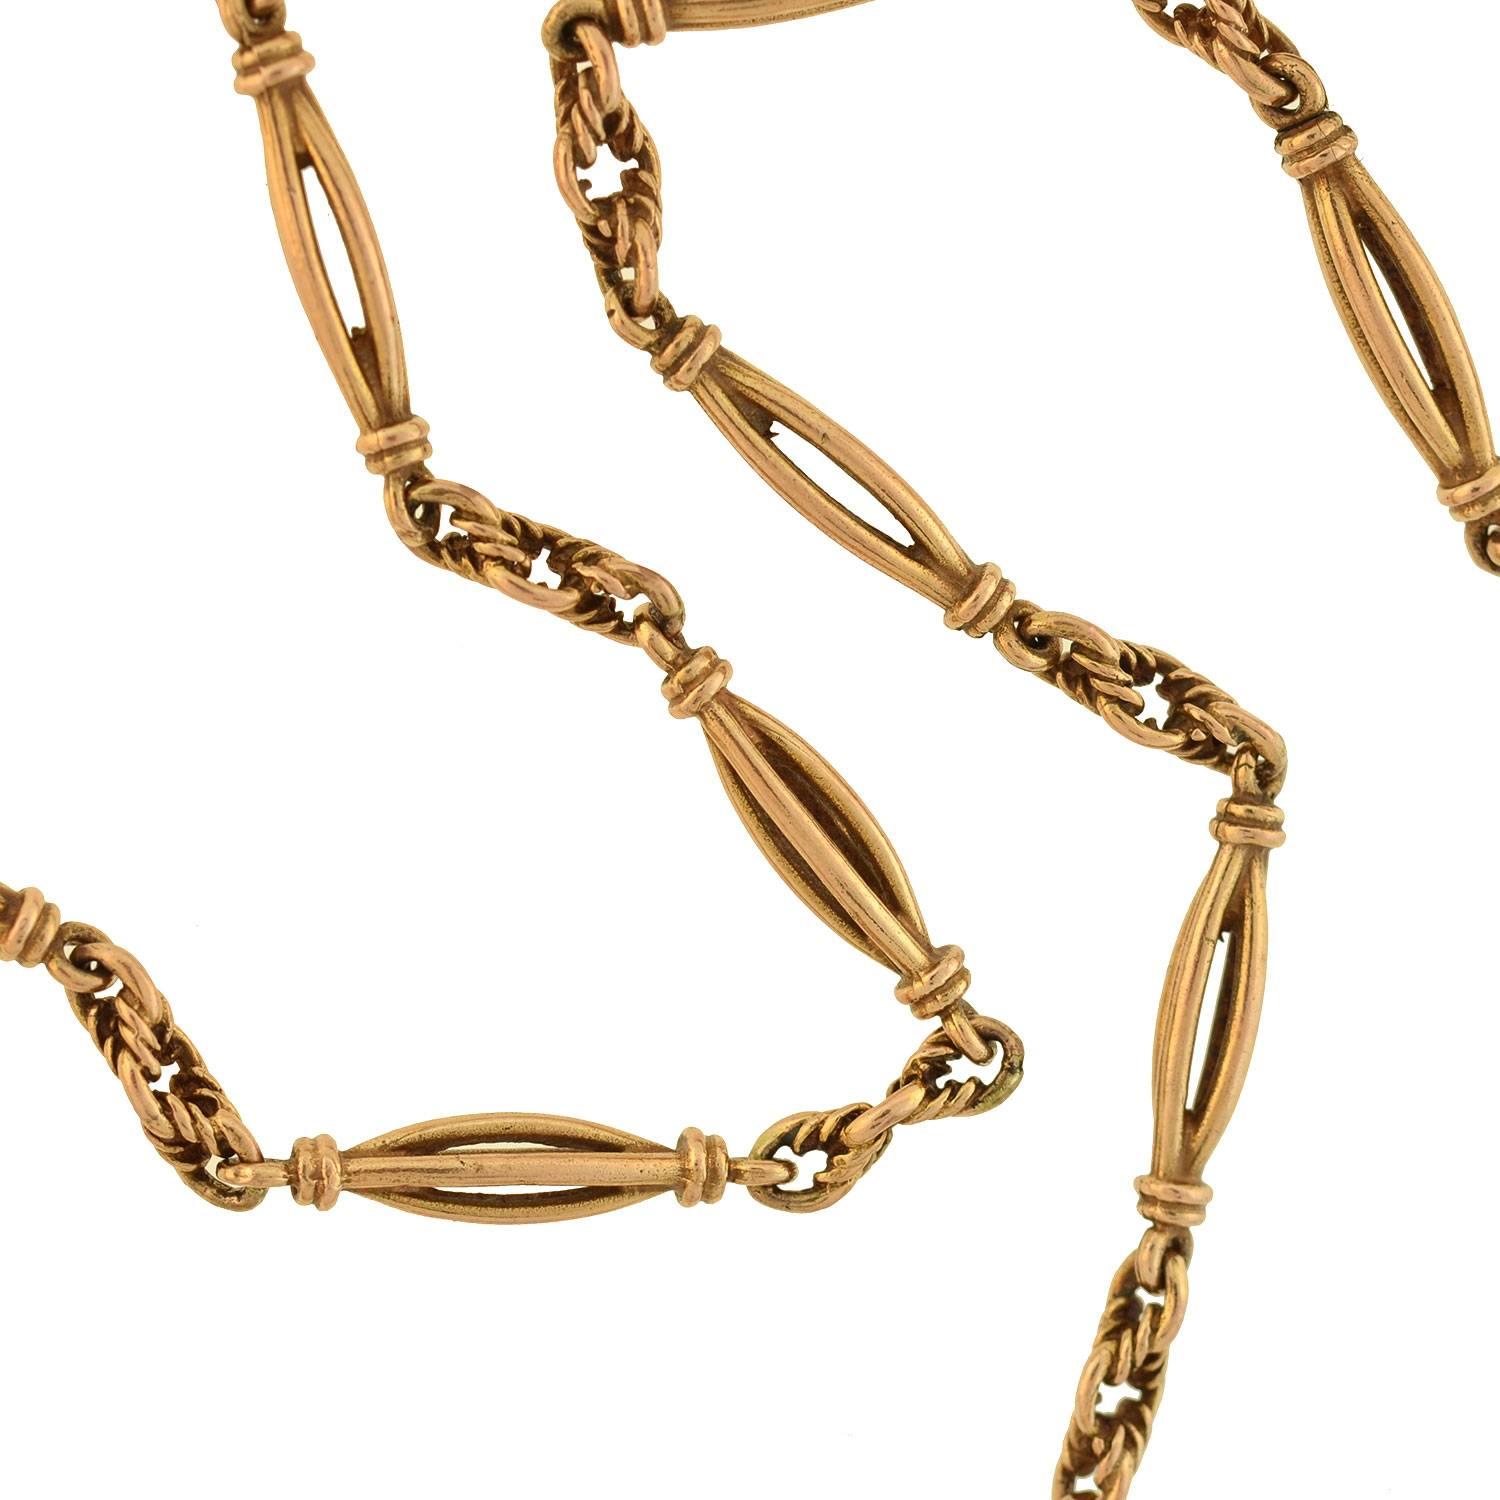 A gorgeous gold watch chain from the Victorian (ca1880) era! Crafted in 9kt rose gold, this fancy chain is comprised of bold ellipse-shaped open wirework links, which alternate with textured connector rings to form a medium length, flowing necklace.